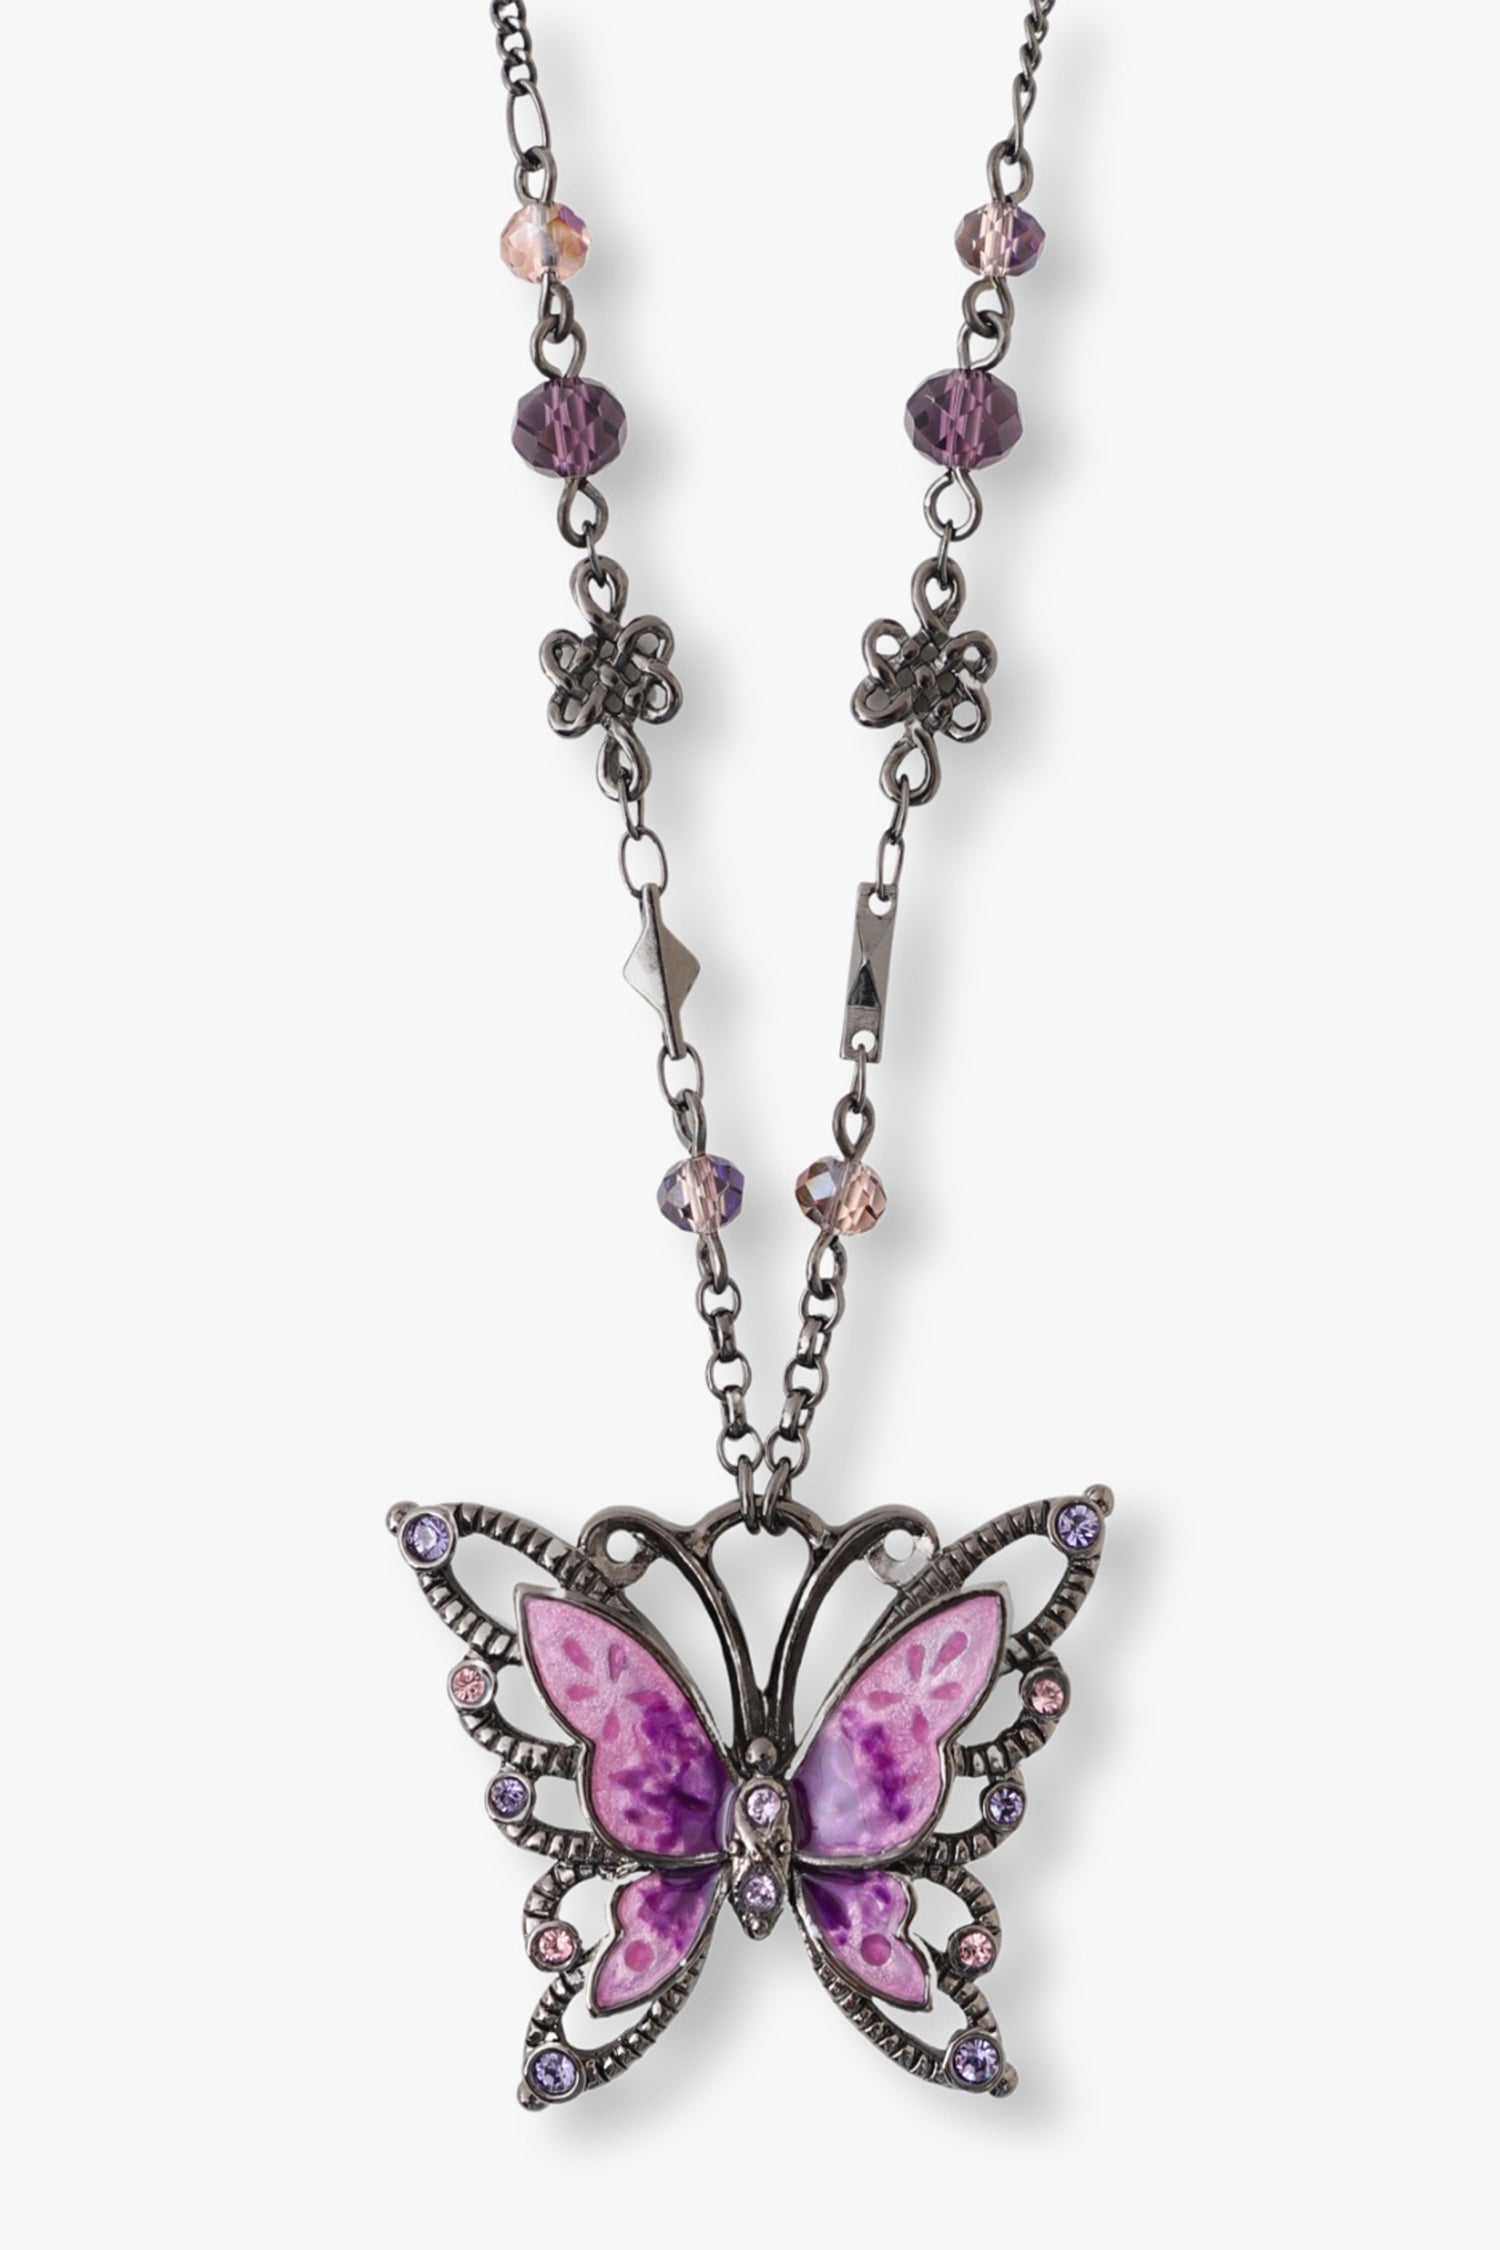 Pendant Necklace, 2-butterflies one on top of the other, full purple and hollow in gunmetal/gemstones